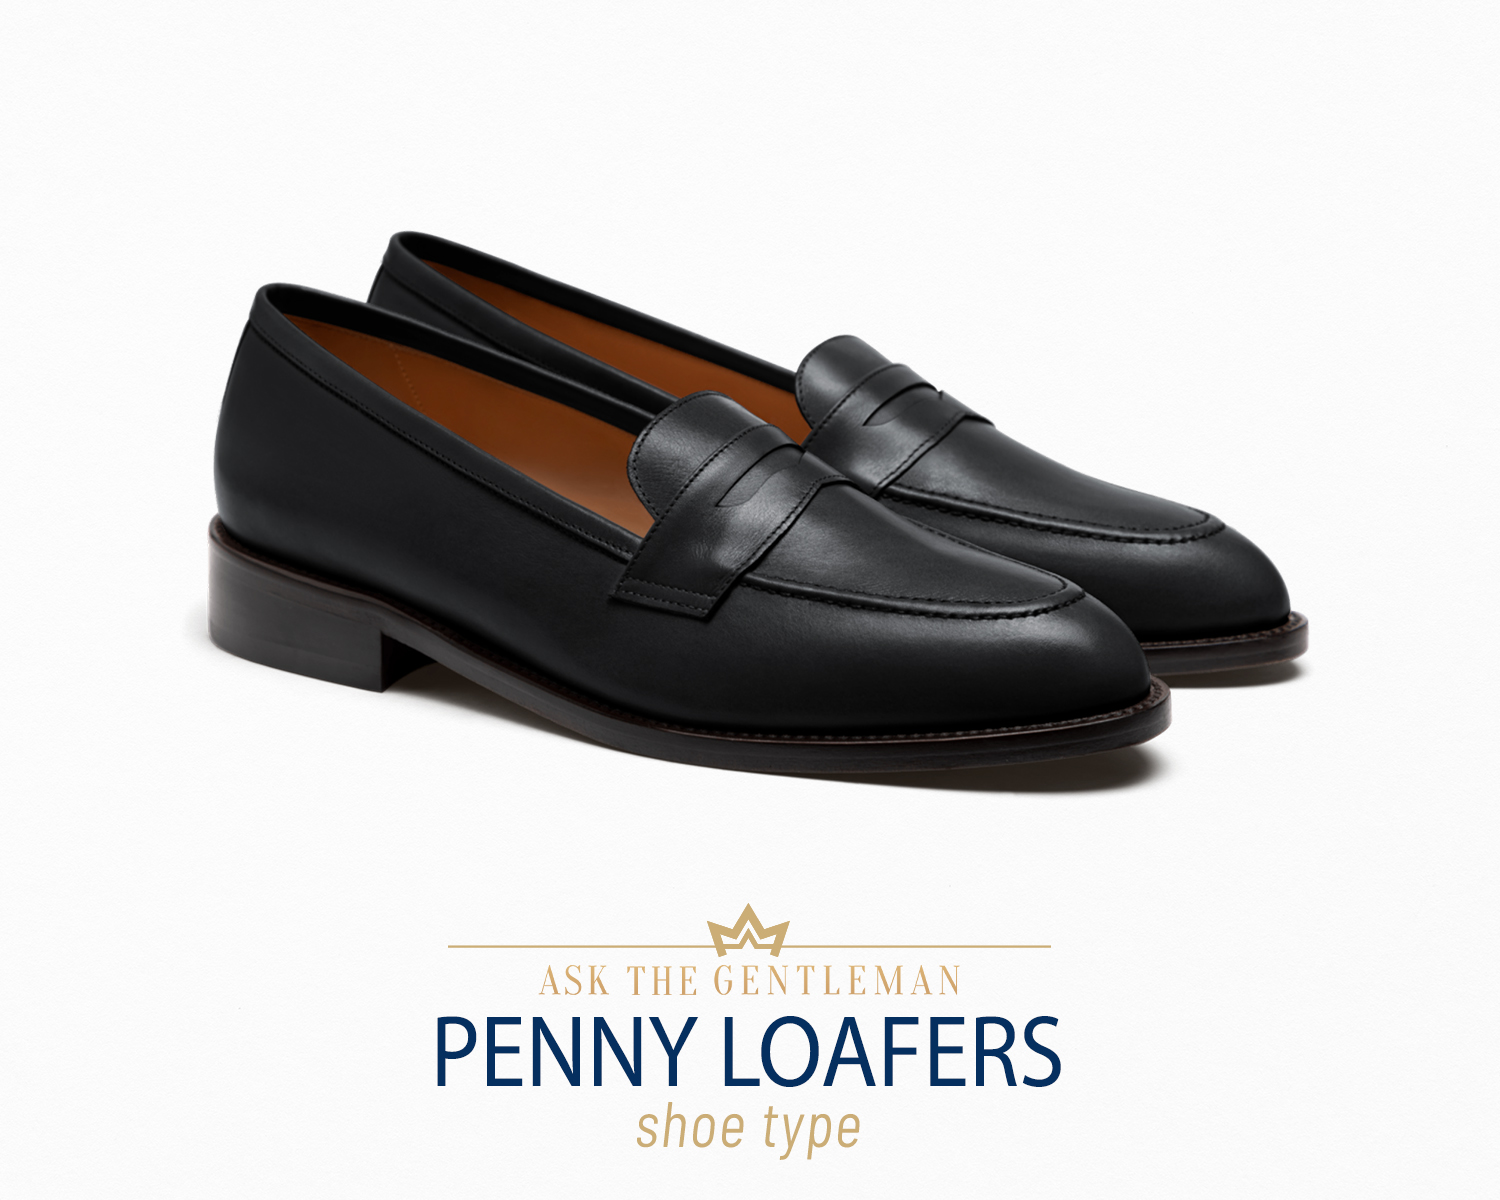 Penny loafer shoe type